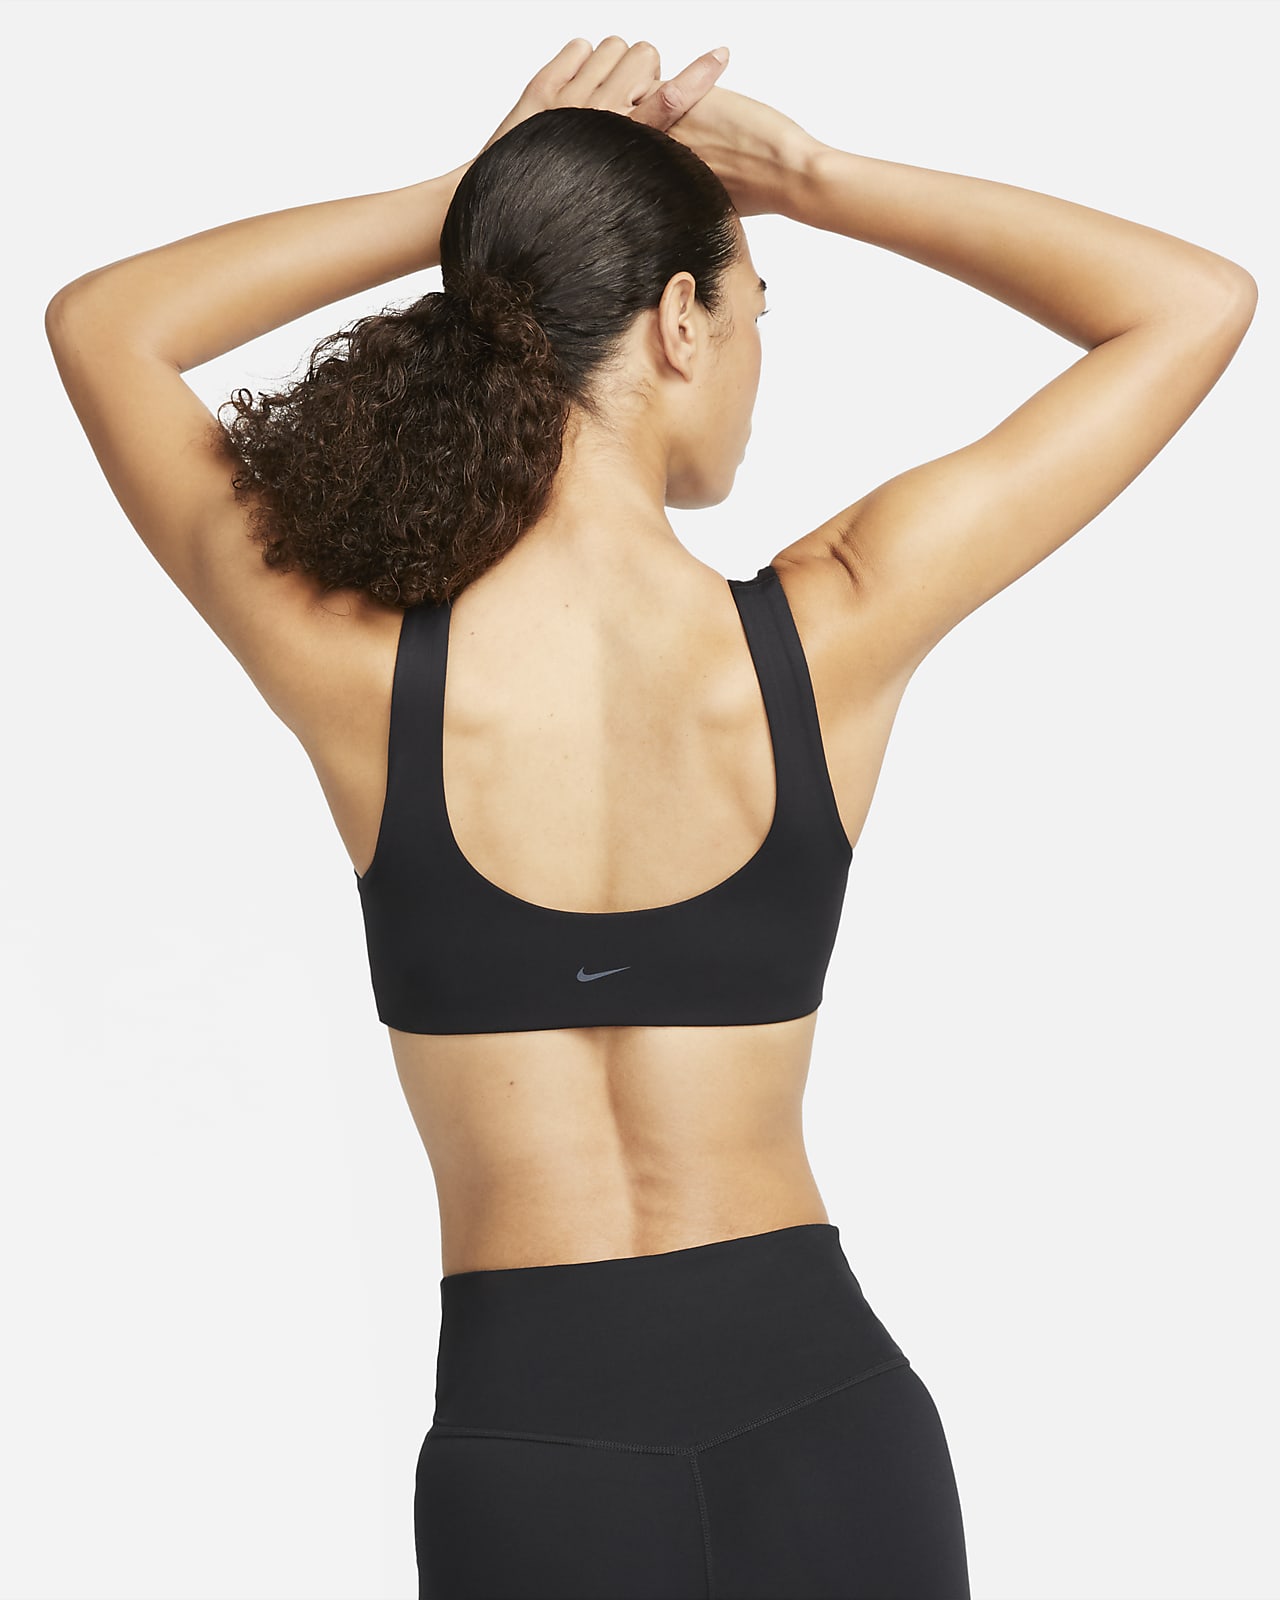 Real talk: Nike Alate just might be THAT sports bra. We asked our